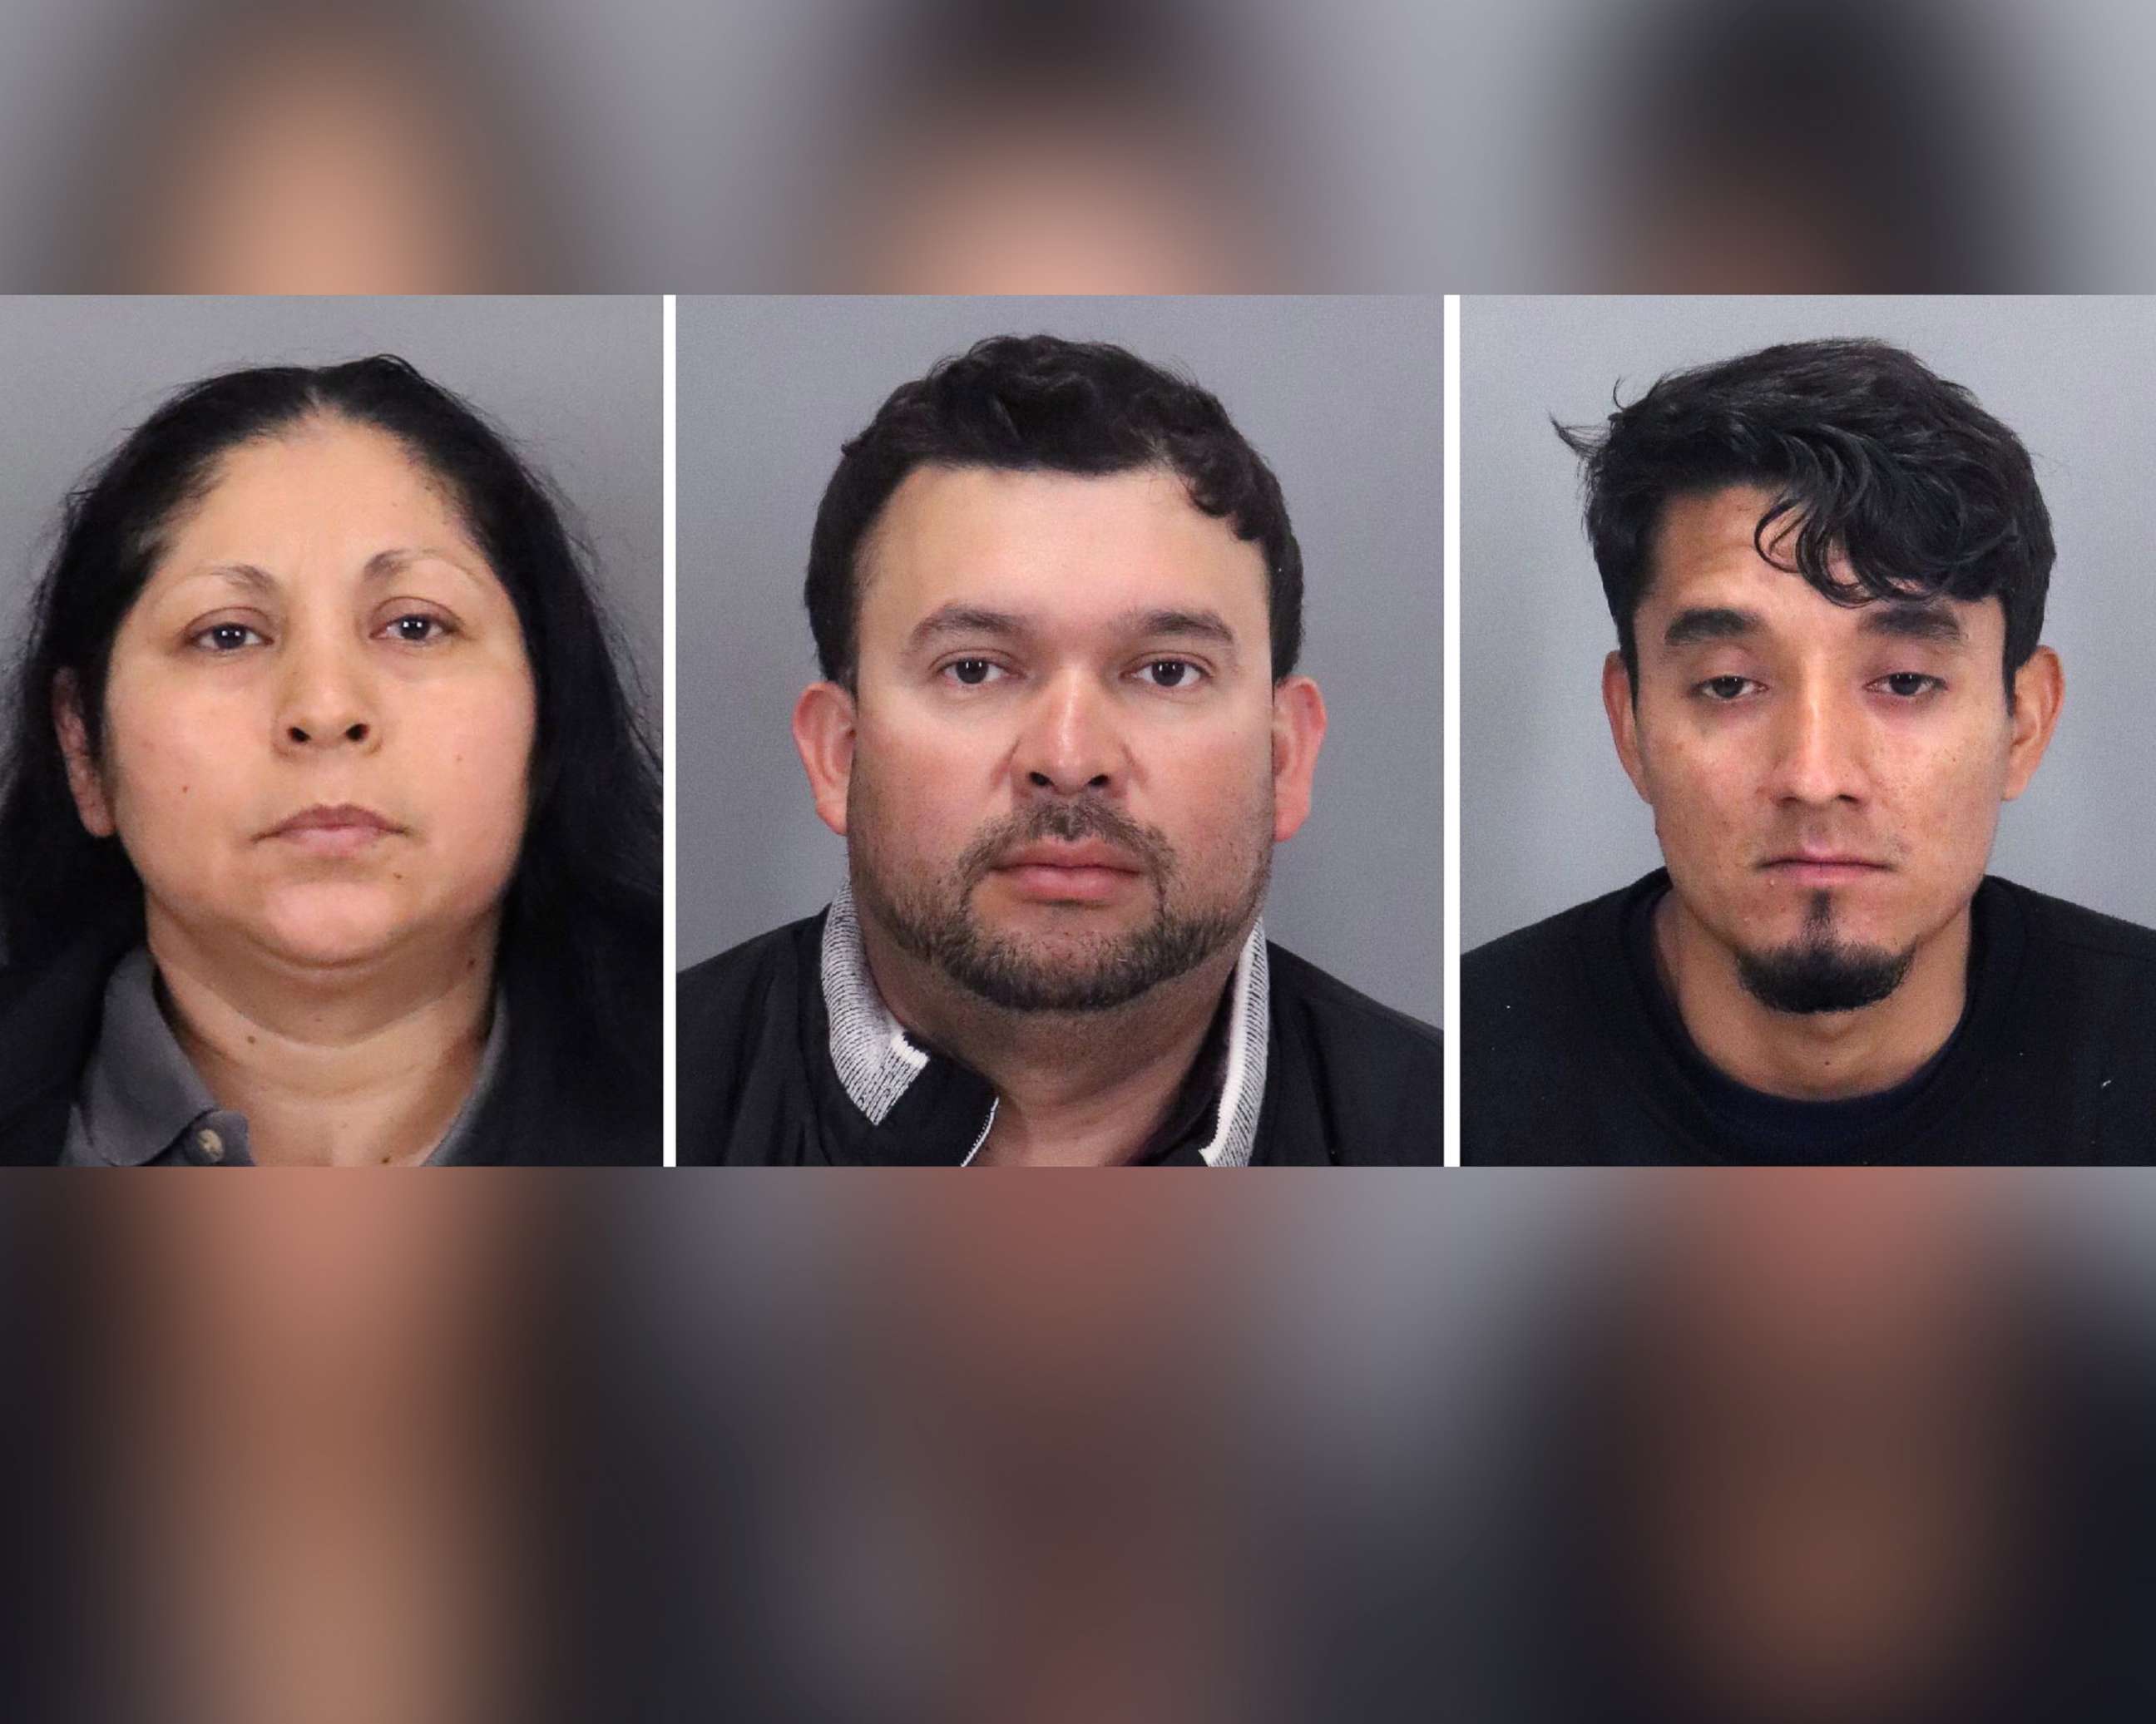 PHOTO: Suspects arrested in the kidnapping of a baby in San Jose, Calif., from left, Yesenia Guadalupe Ramirez, Baldomeo Sandoval and Jose Roman Portillo.